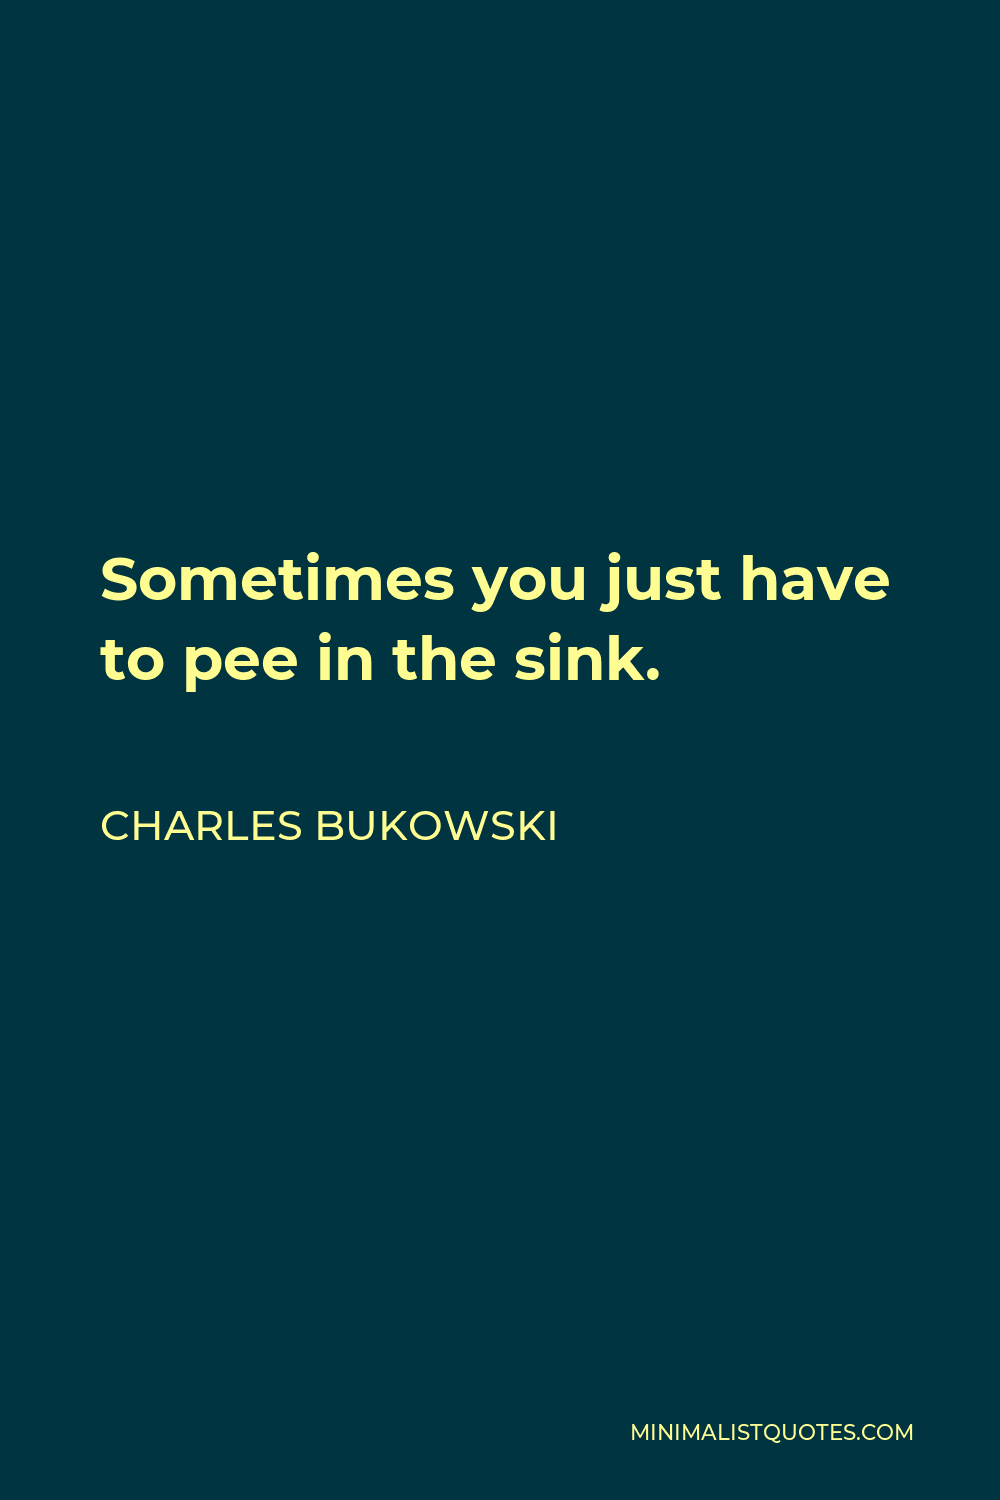 Charles Bukowski Quote: Sometimes you just have to pee in the sink.